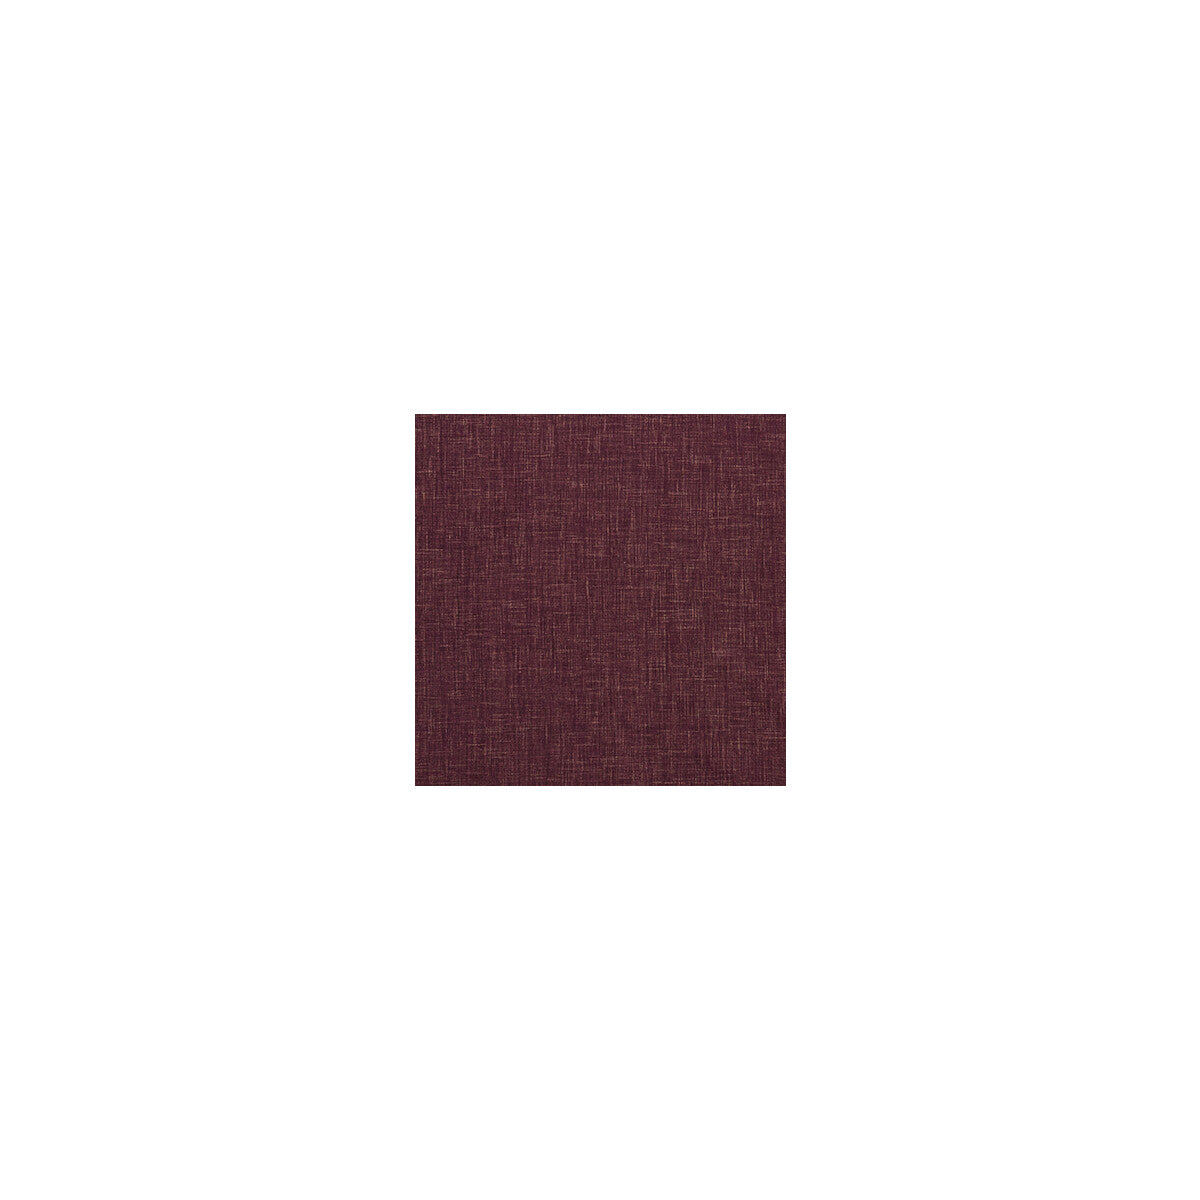 Albany fabric in damson color - pattern F1098/06.CAC.0 - by Clarke And Clarke in the Clarke &amp; Clarke Albany &amp; Moray collection